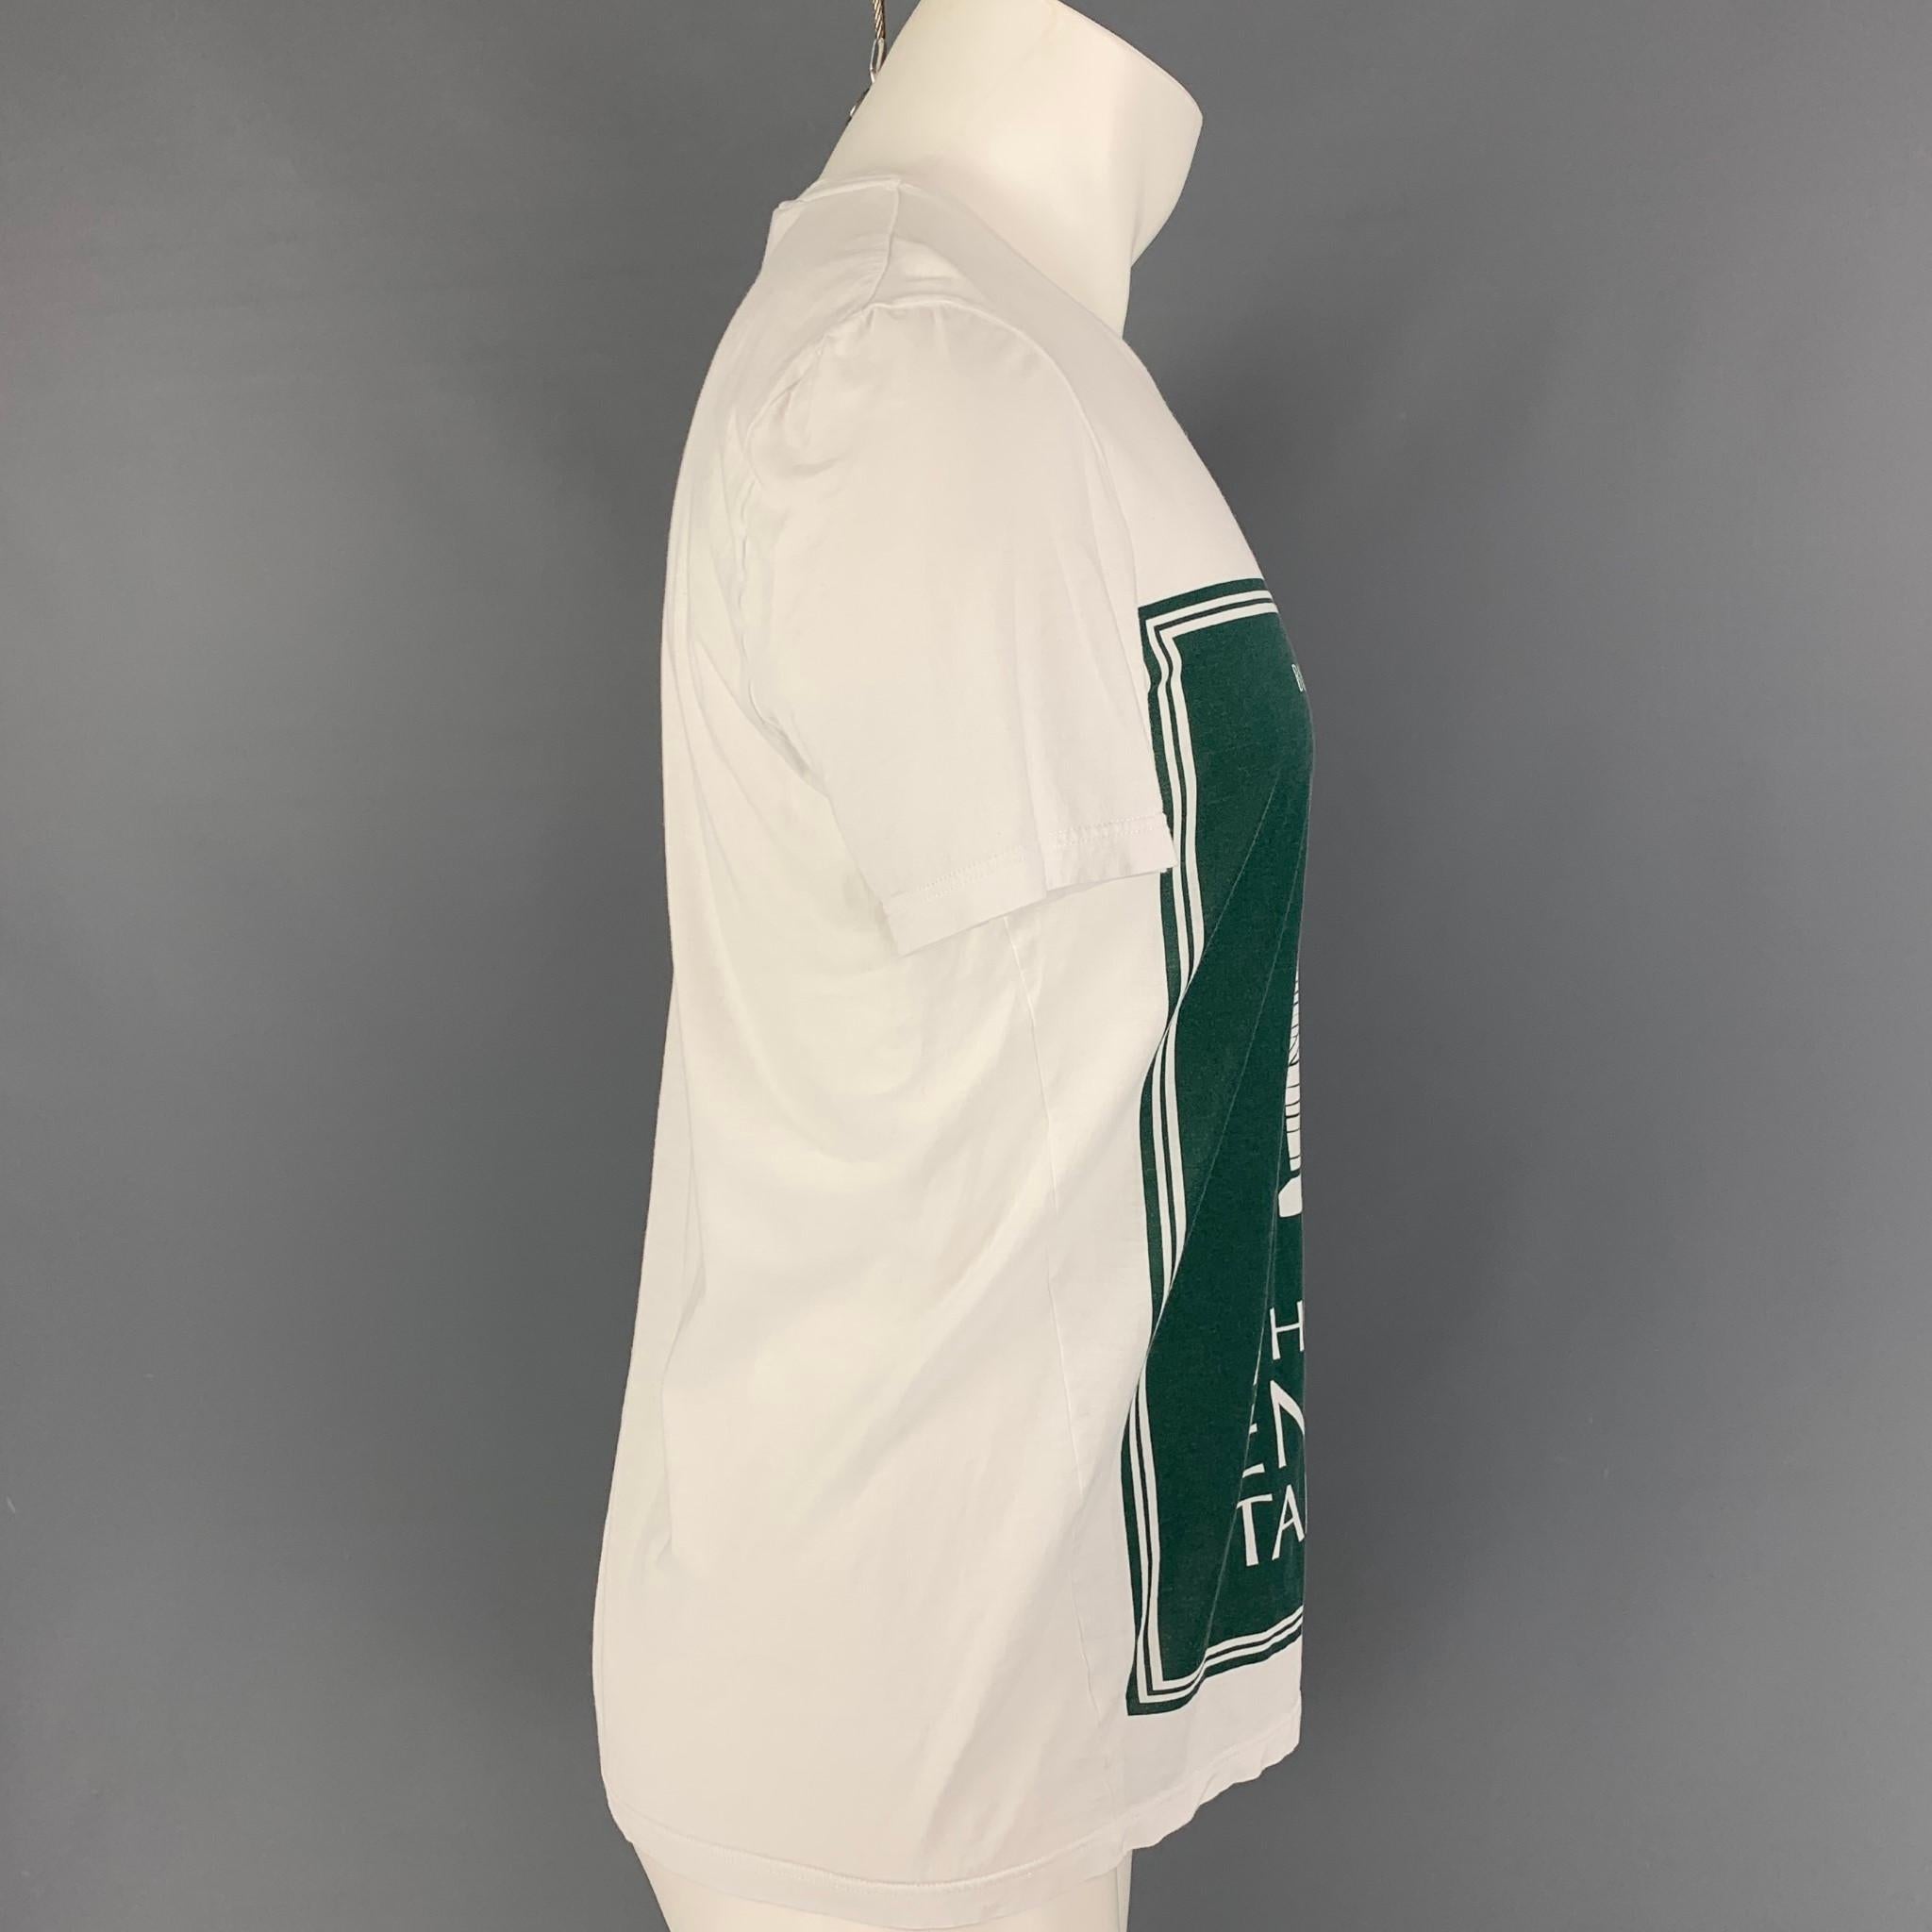 BURBERRY PRORSUM Spring 2015 t-shirt comes in green& white cotton featuring 'A History Of English Tailoring' graphic and a crew-neck. 

Very Good Pre-Owned Condition.
Marked: S

Measurements:

Shoulder: 18.5 in.
Chest: 38 in.
Sleeve: 9 in.
Length: